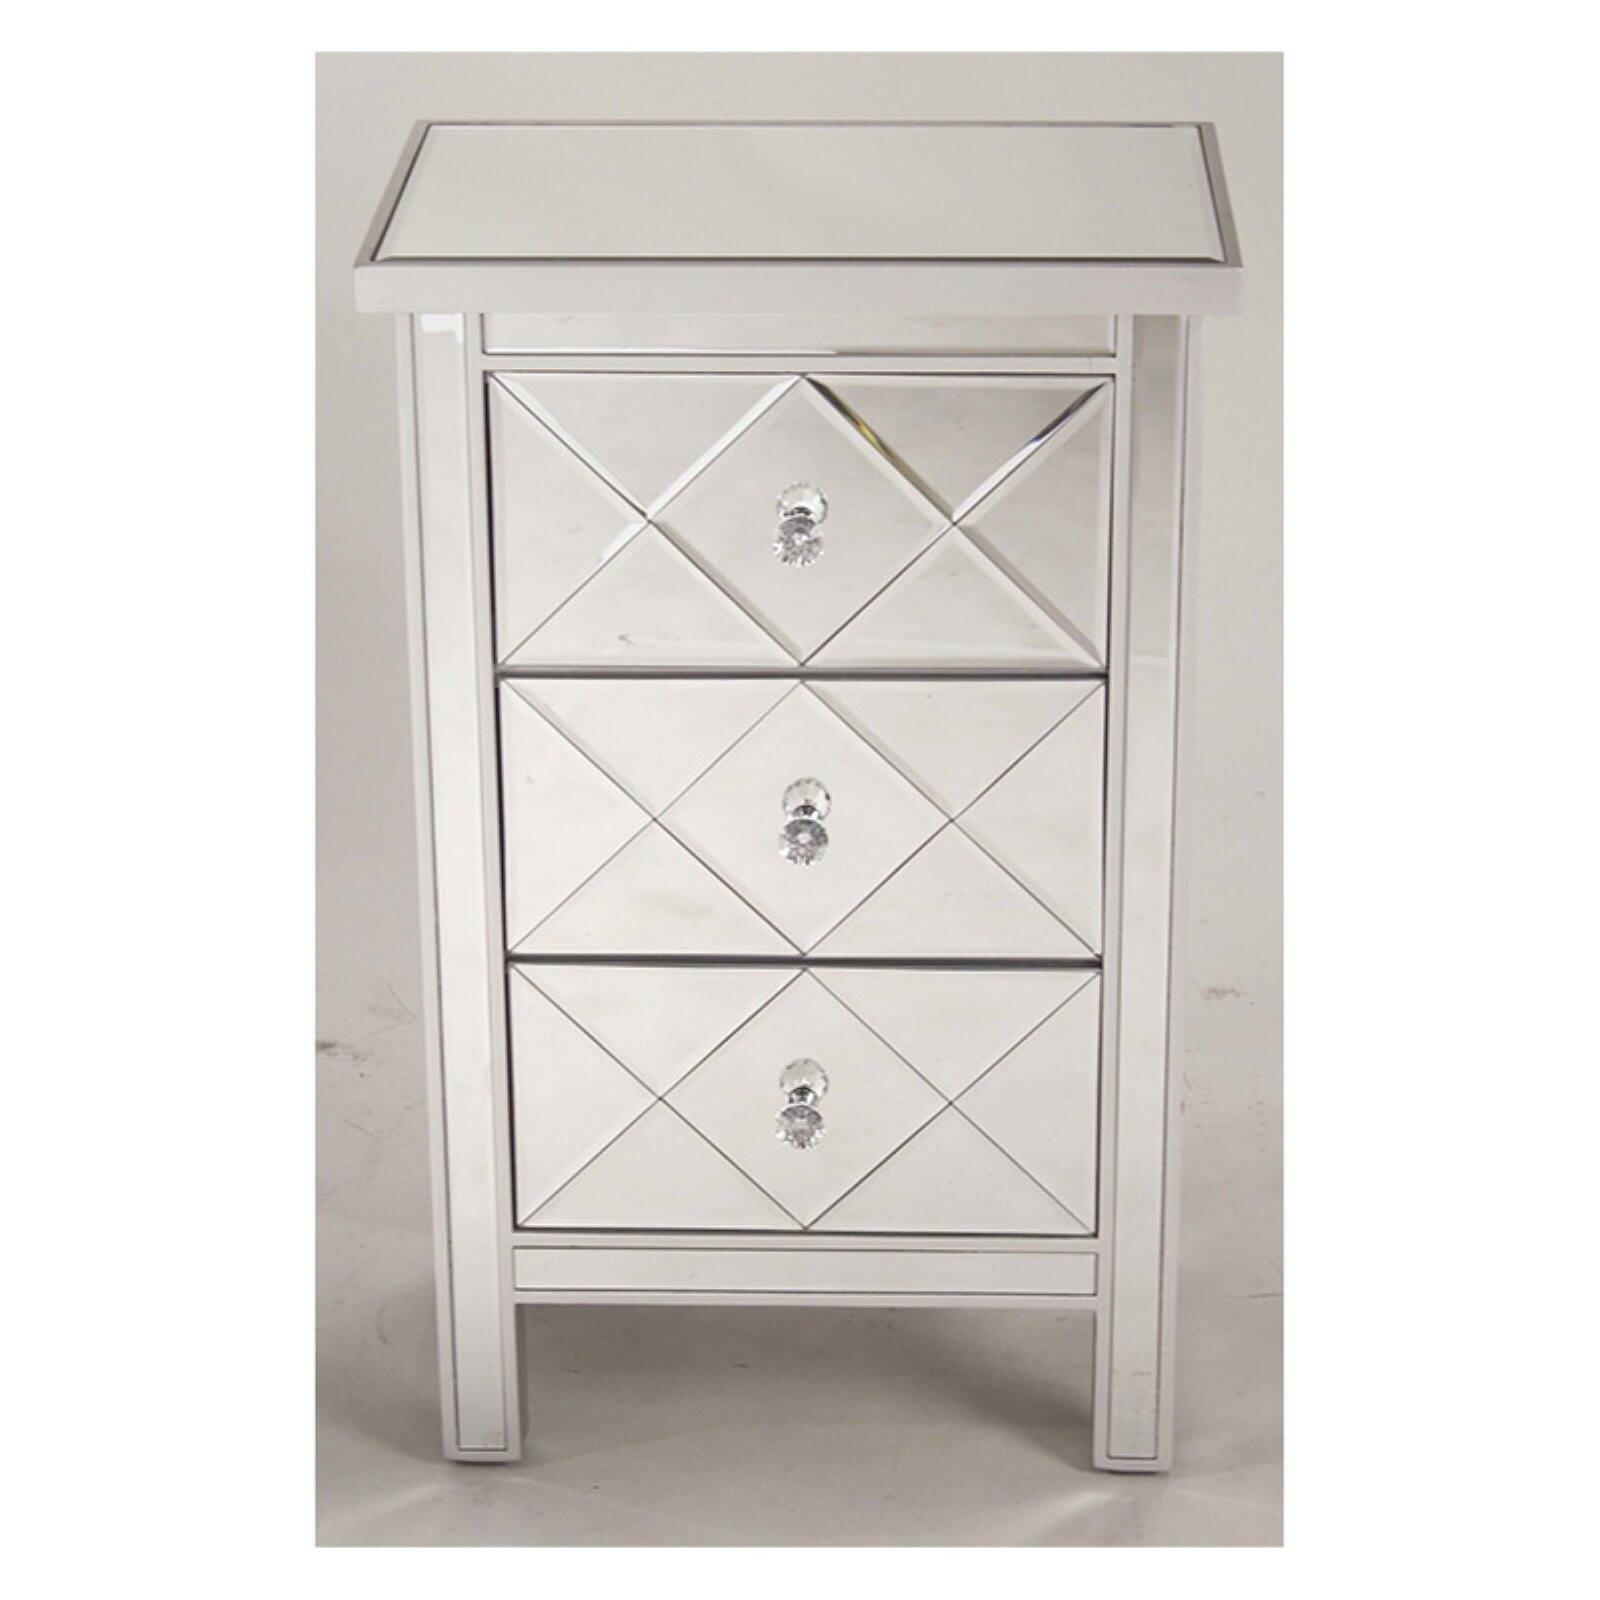 Heather Ann Creations Emmy 3 Drawer Mirrored Accent Cabinet - image 5 of 7